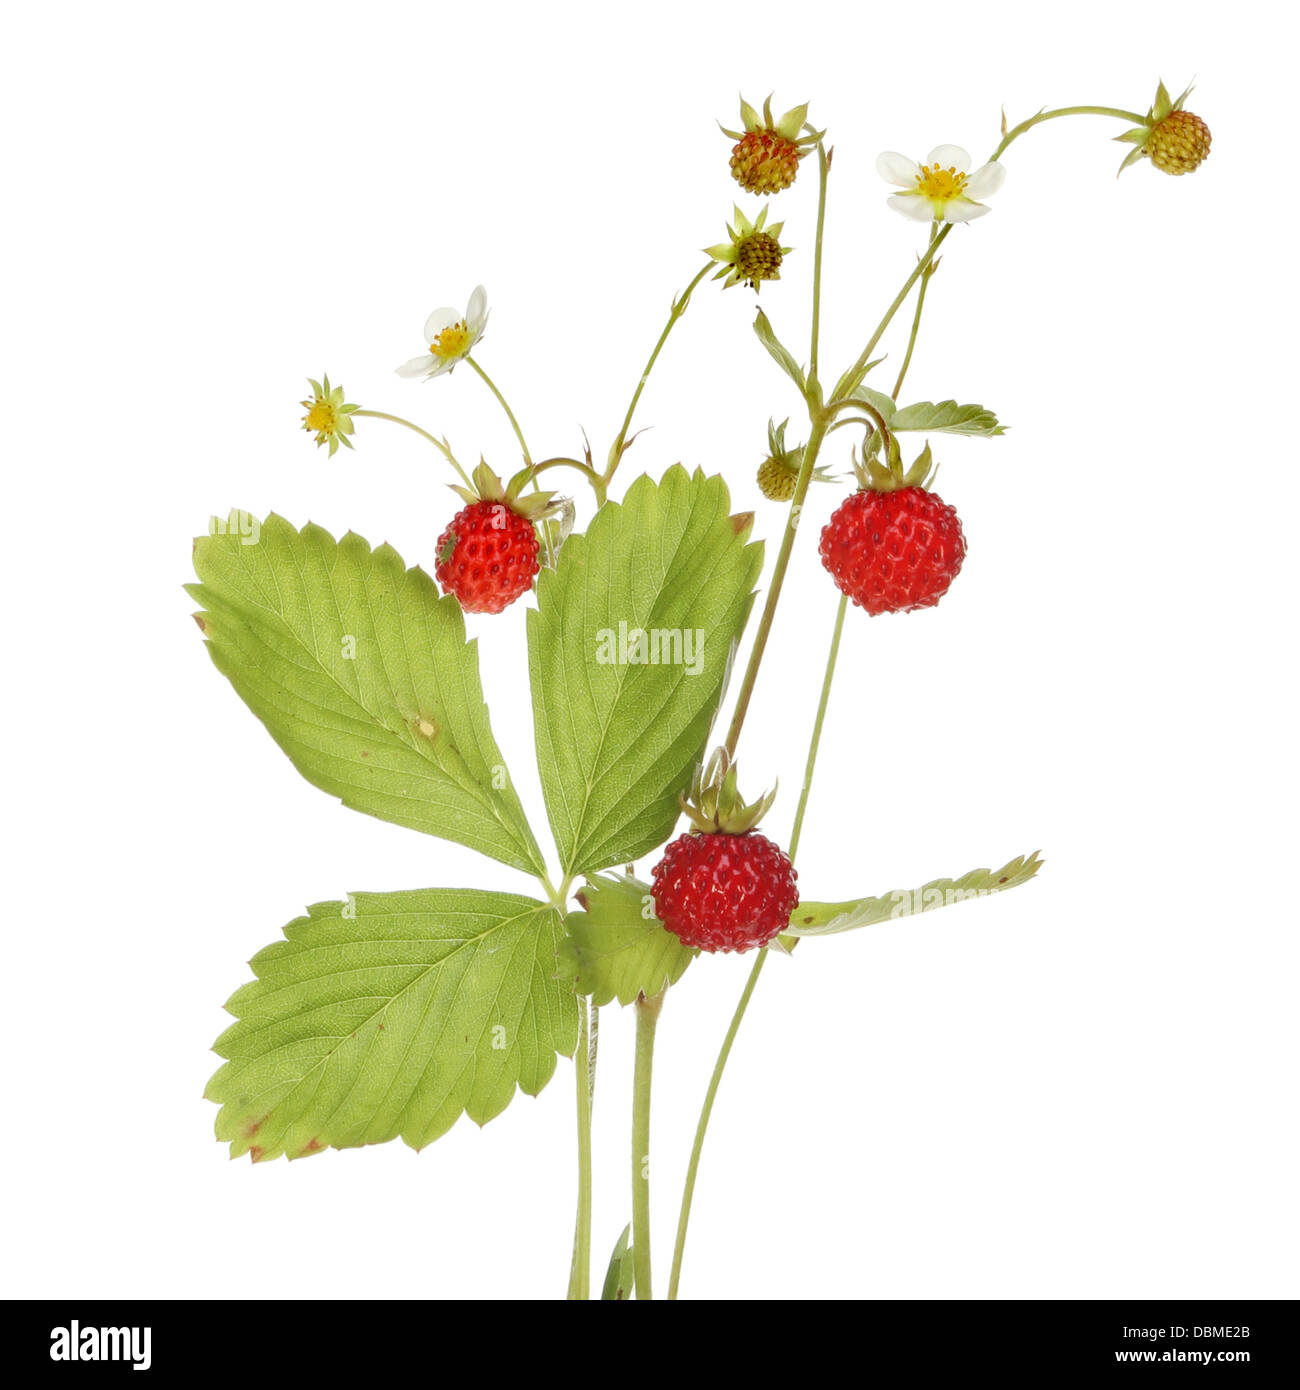 Wild strawberry, Fragaria vesca, fruit, flowers and foliage isolated against white Stock Photo